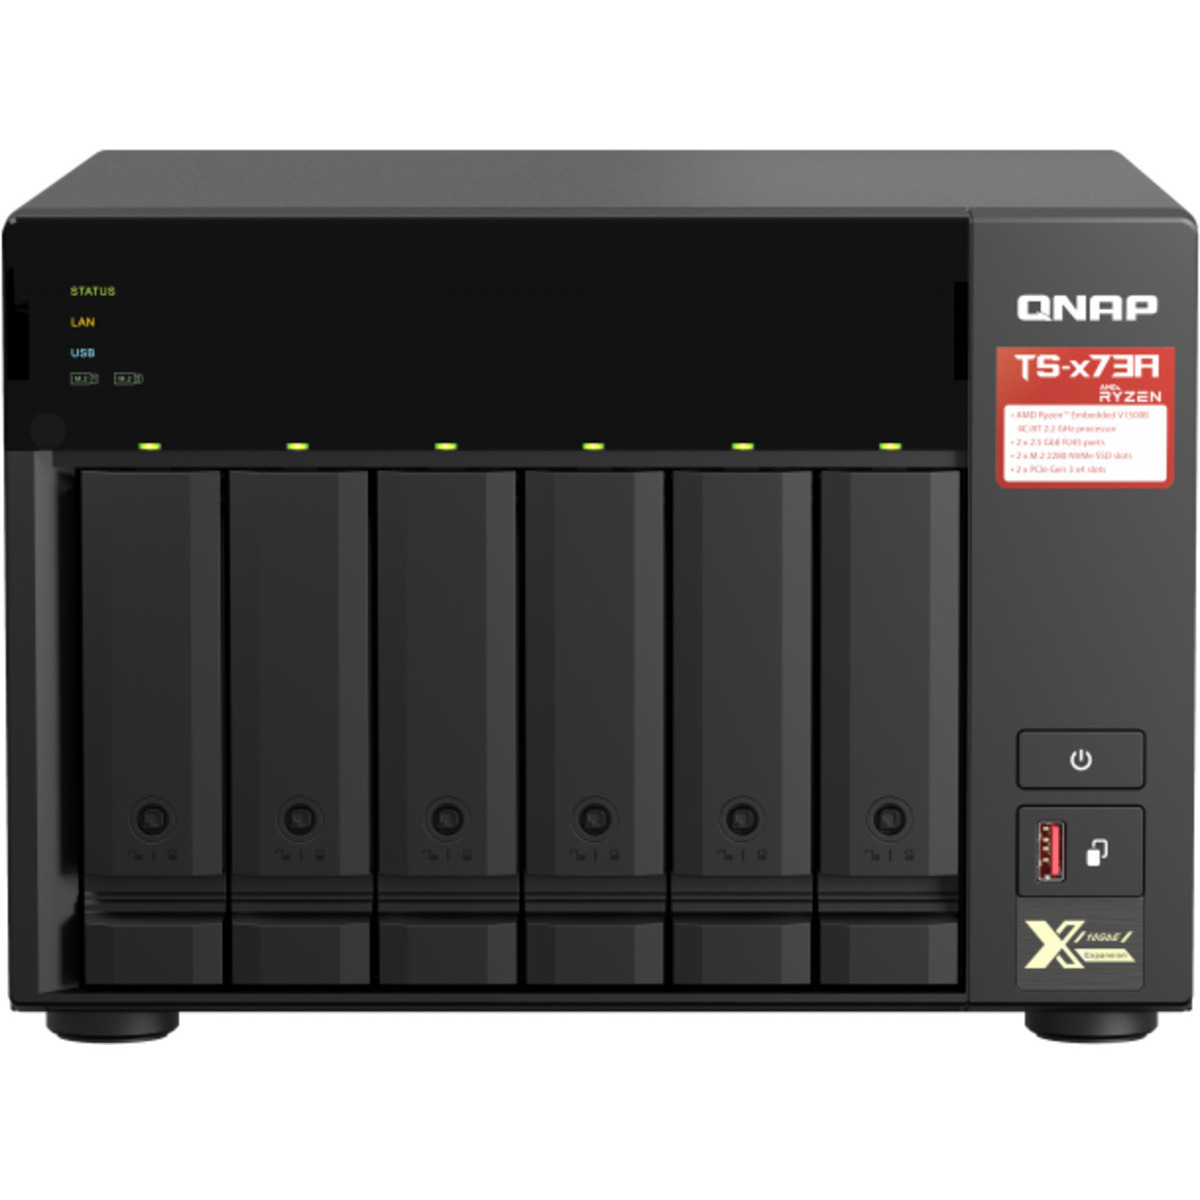 buy QNAP TS-673A 36tb Desktop NAS - Network Attached Storage Device 6x6000gb Western Digital Red WD60EFAX 3.5 5400rpm SATA 6Gb/s HDD NAS Class Drives Installed - Burn-In Tested - ON SALE - nas headquarters buy network attached storage server device das new raid-5 free shipping usa spring sale TS-673A